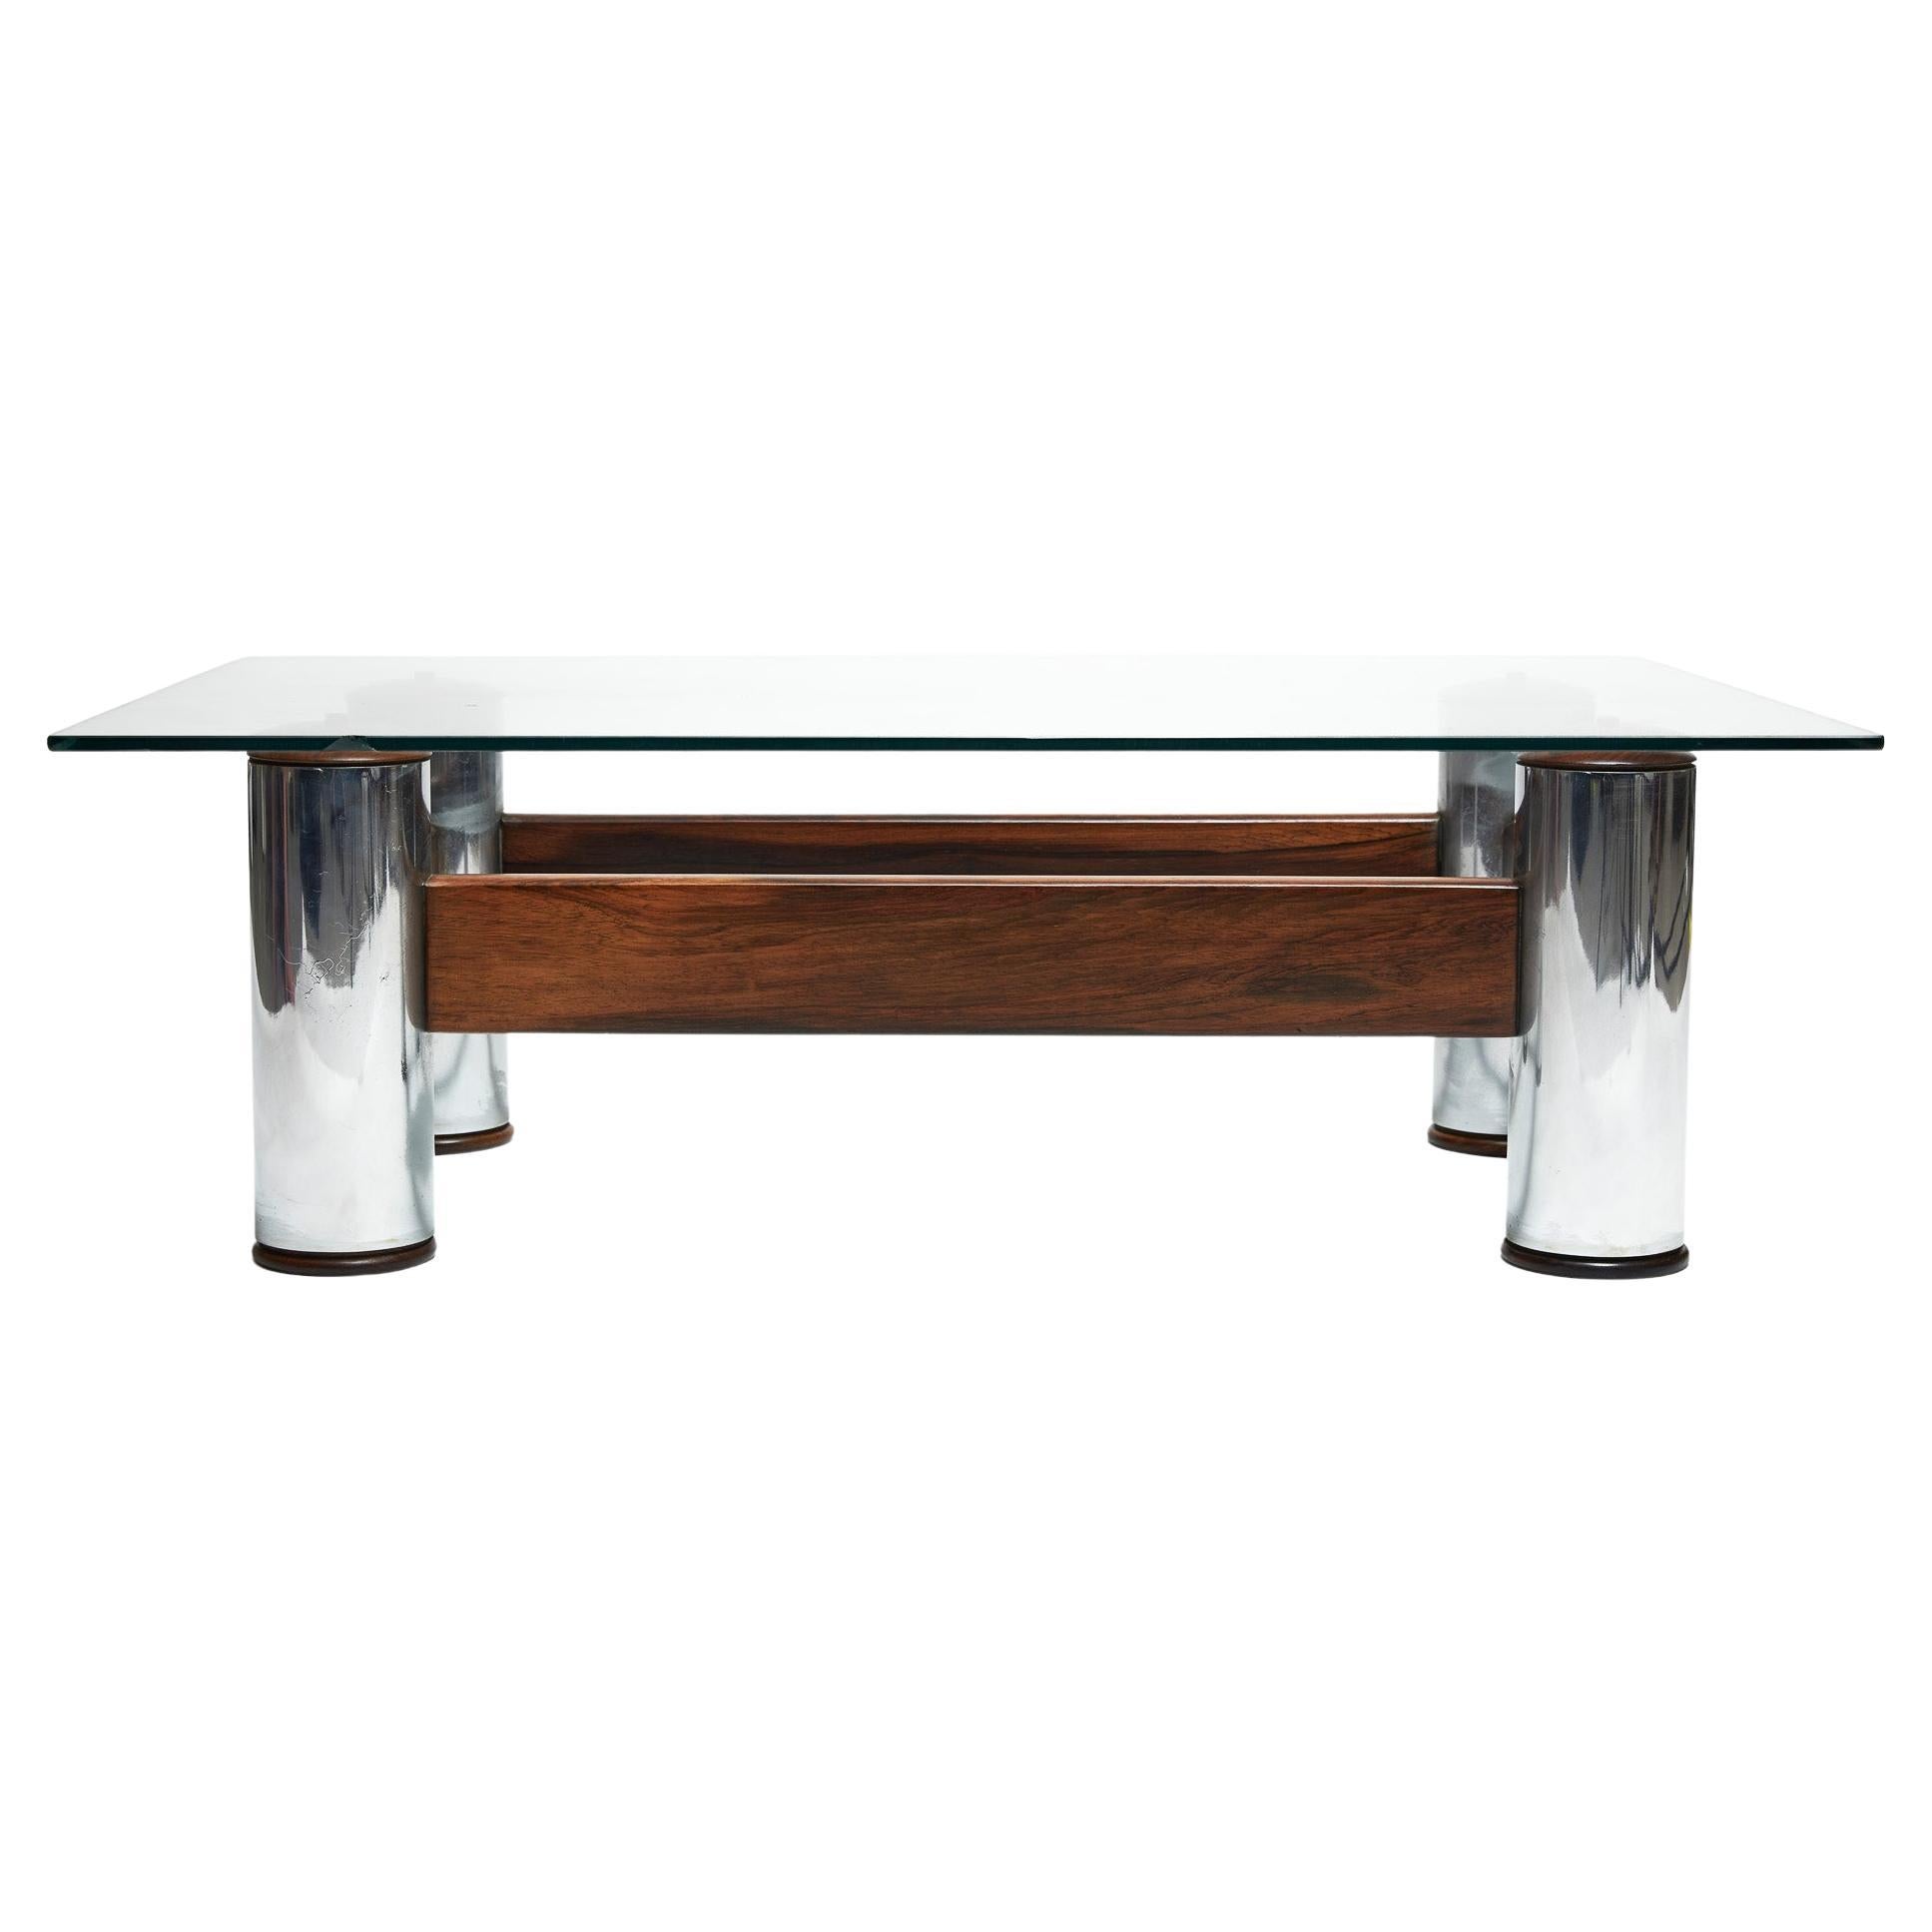 Midcentury ModeCoffee Table in Hardwood & Chrome by Sergio Rodrigues 1965 Brazil